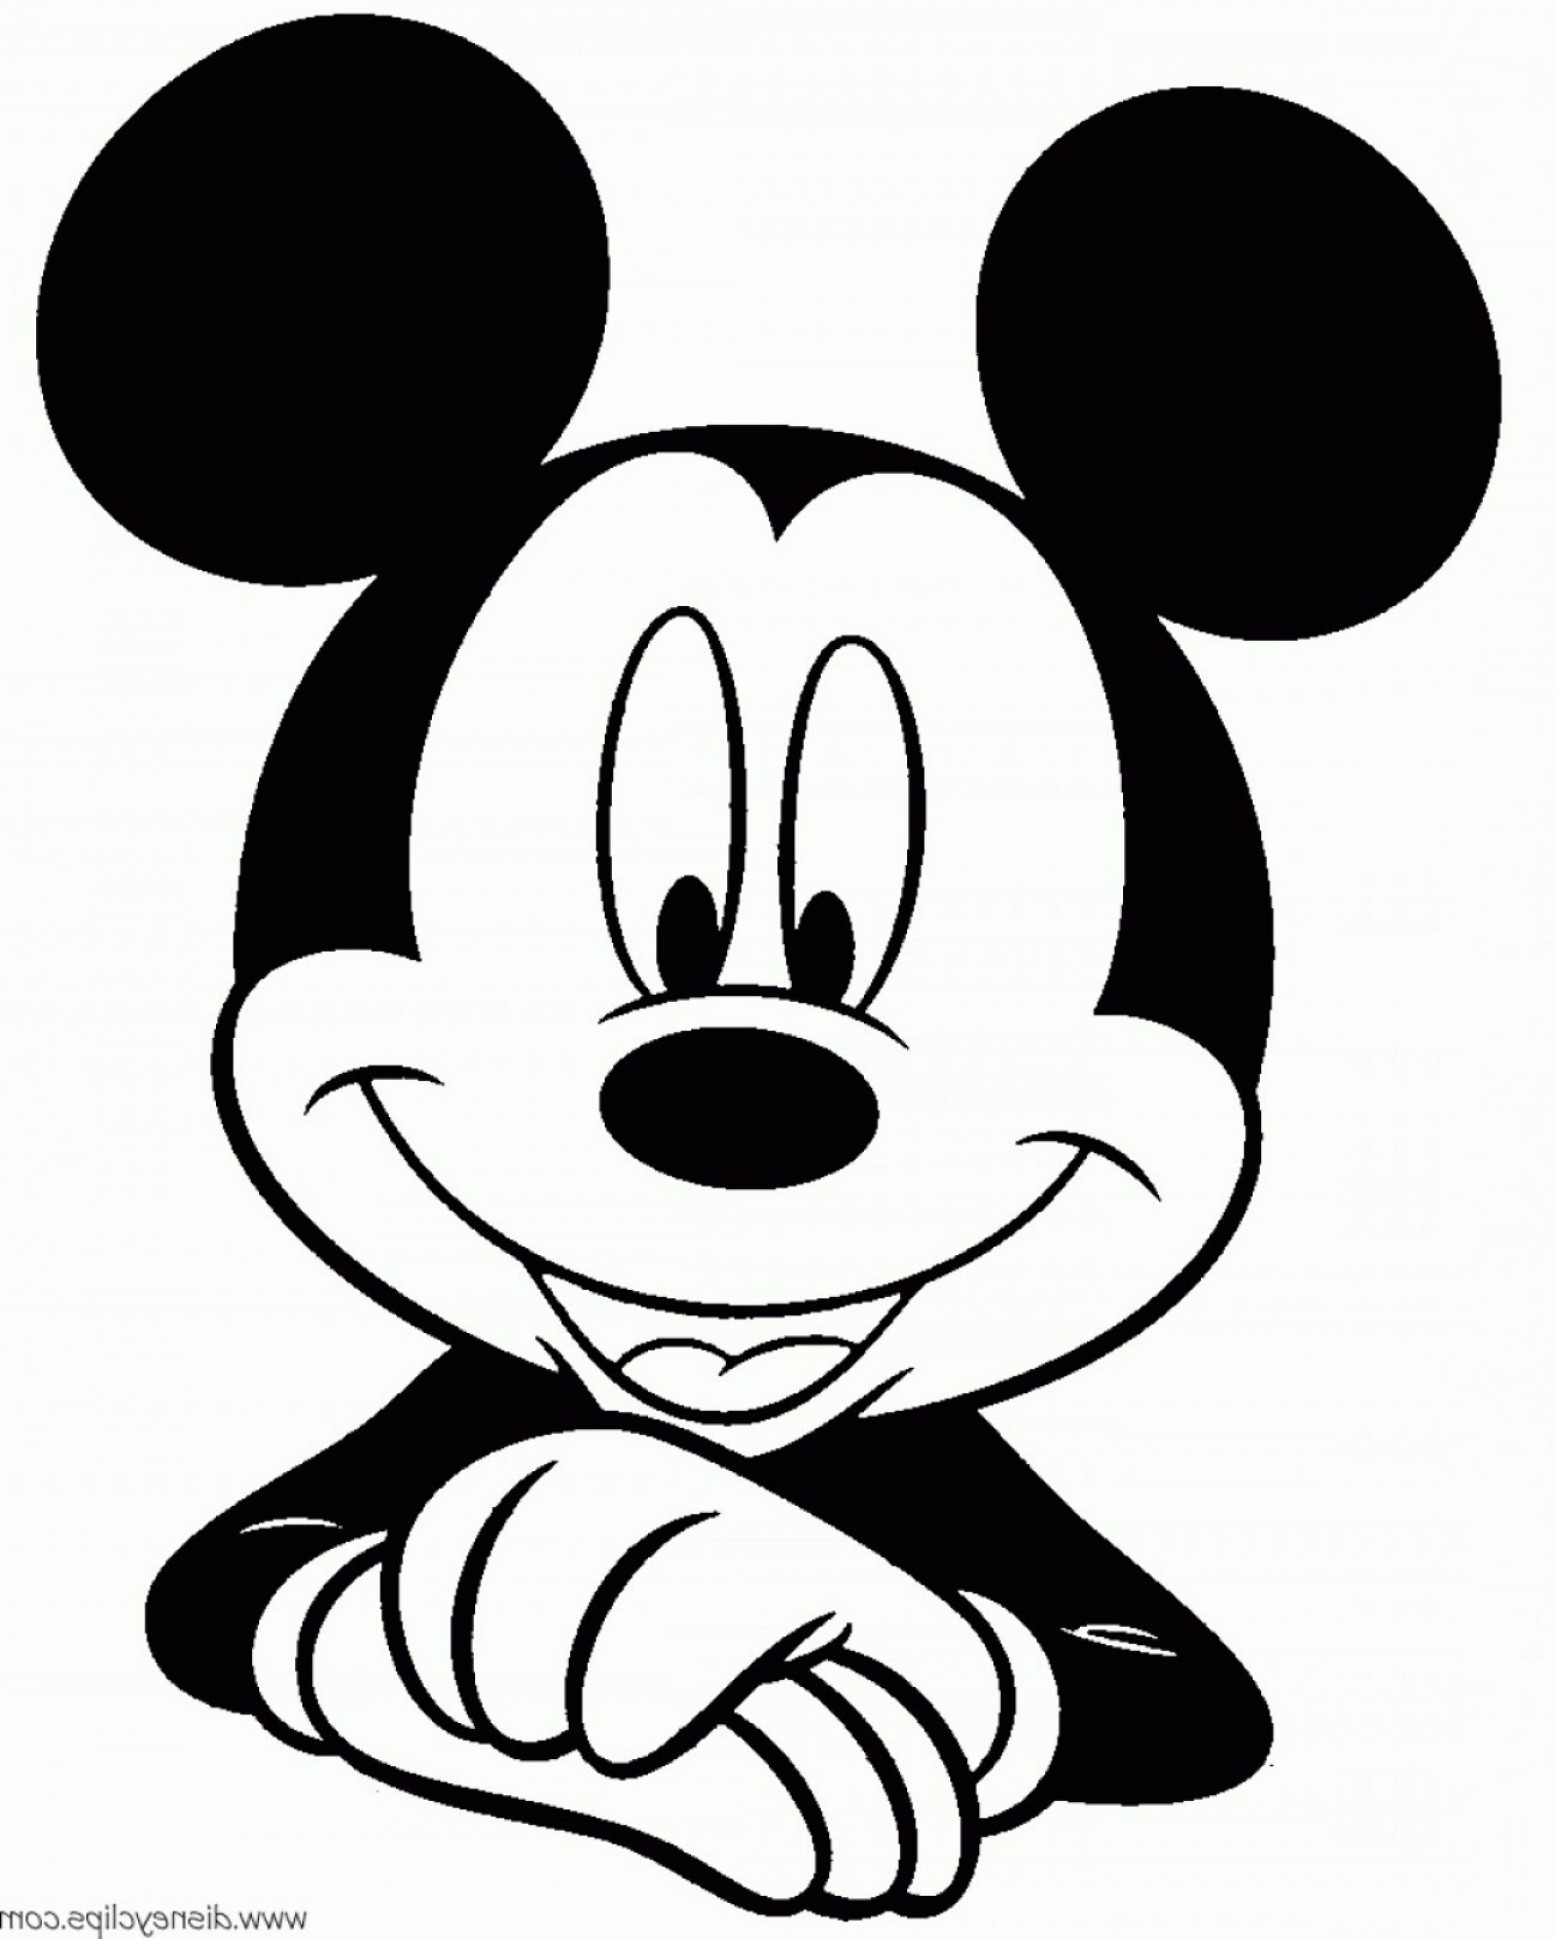 mickey-mouse-face-drawing-free-download-on-clipartmag